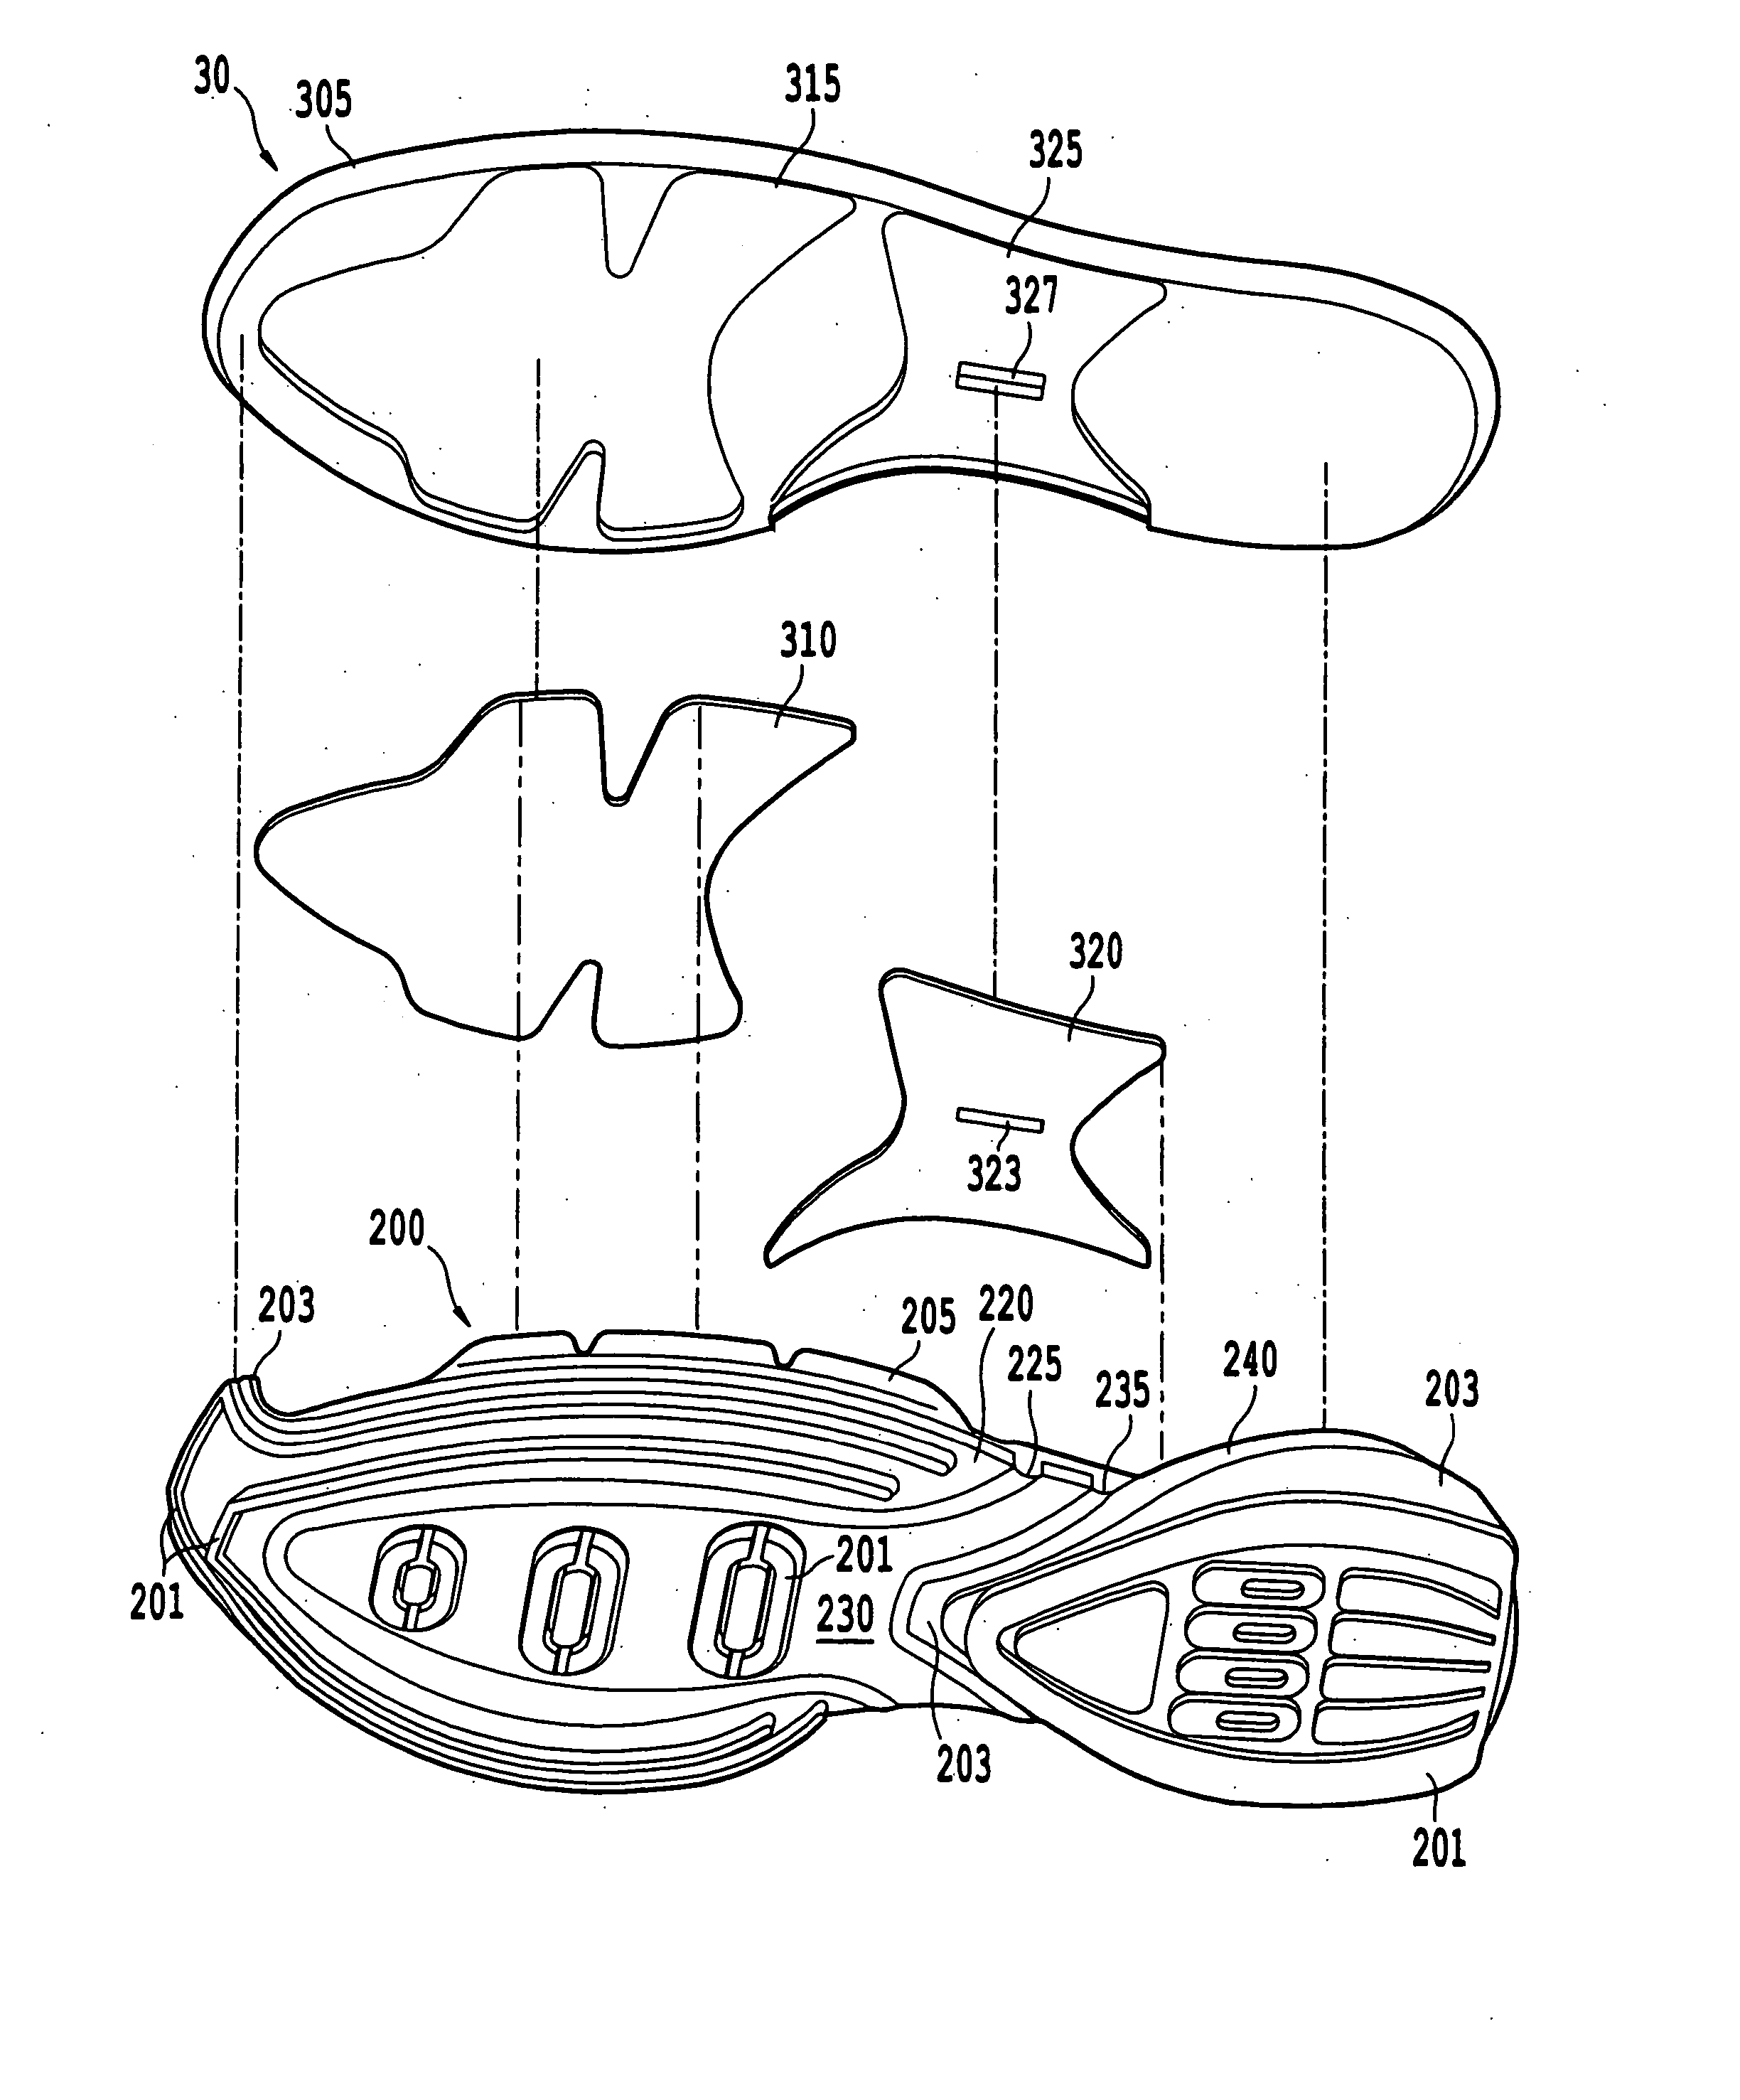 Adaptable shoe having an expandable sole assembly